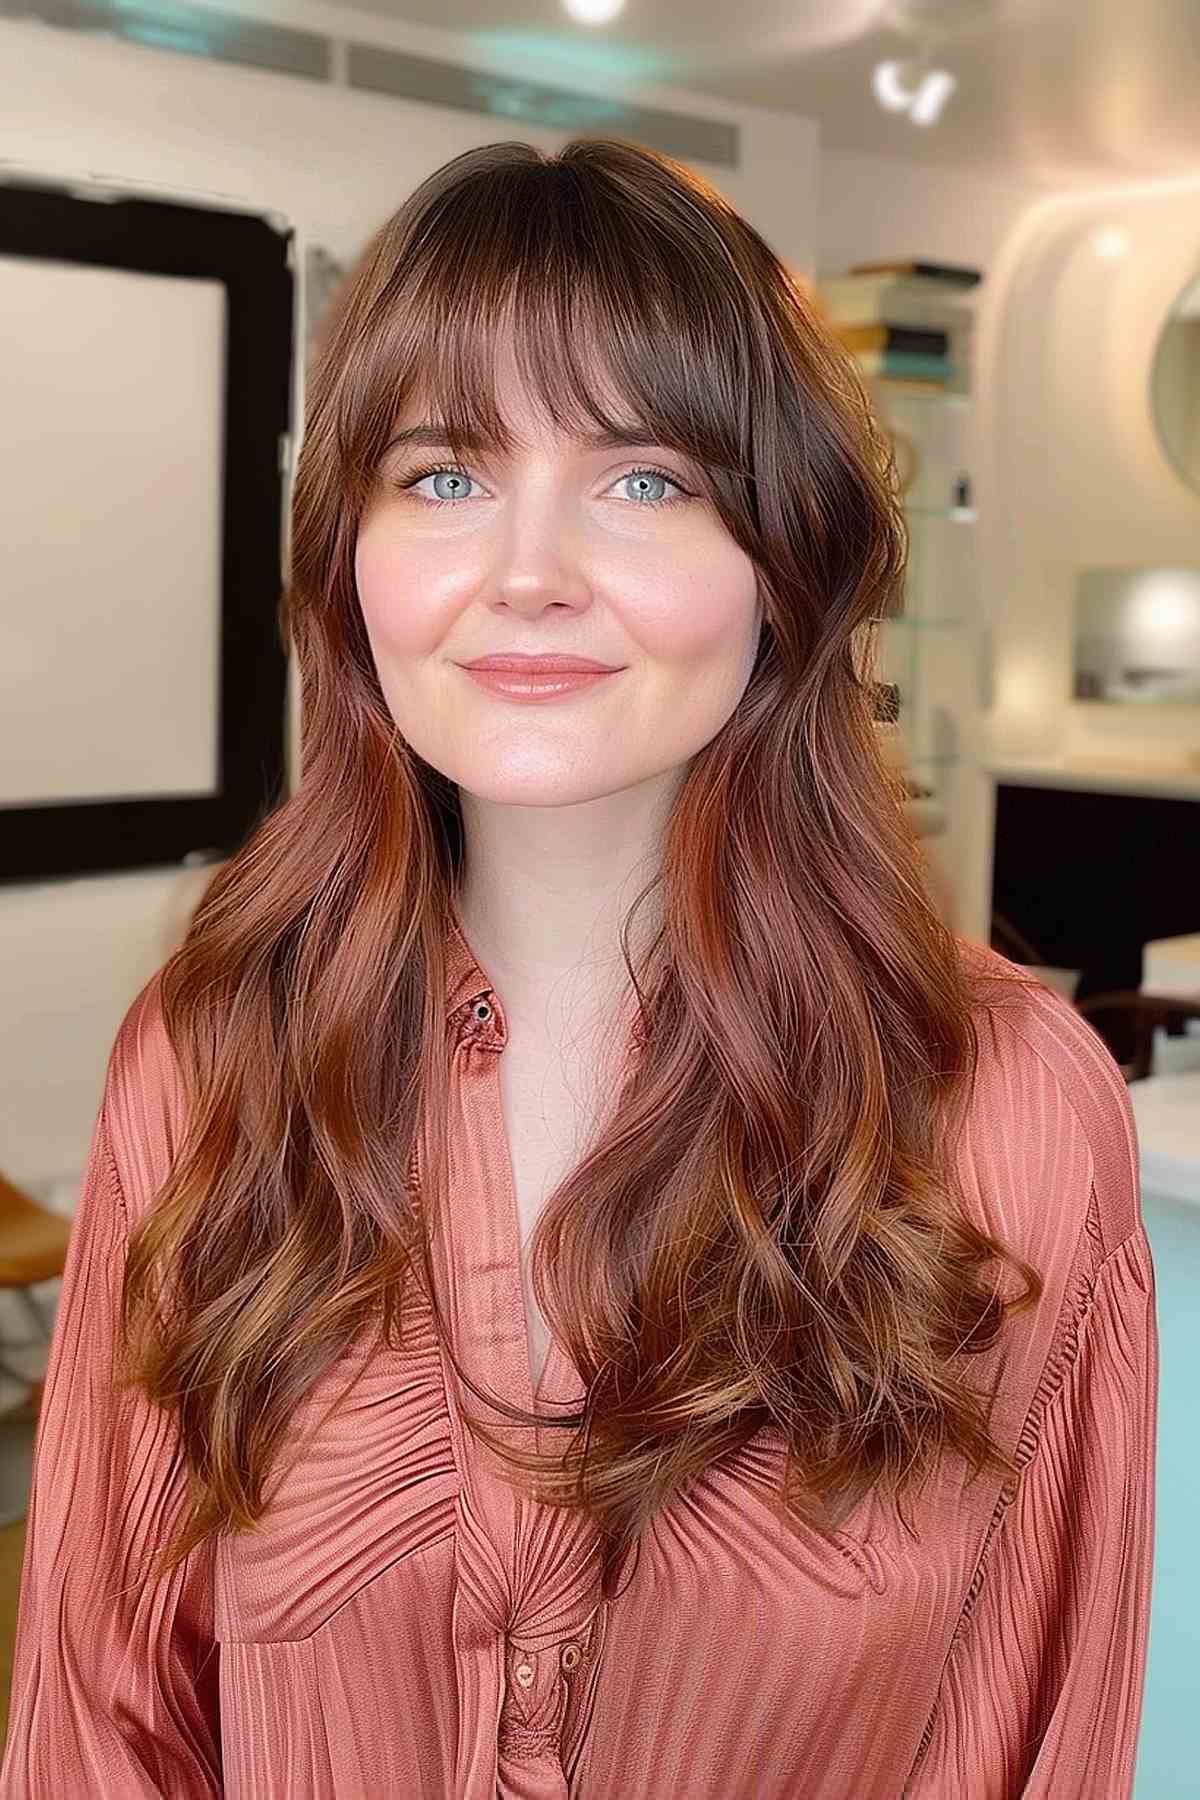 Long layered hair with arched bangs